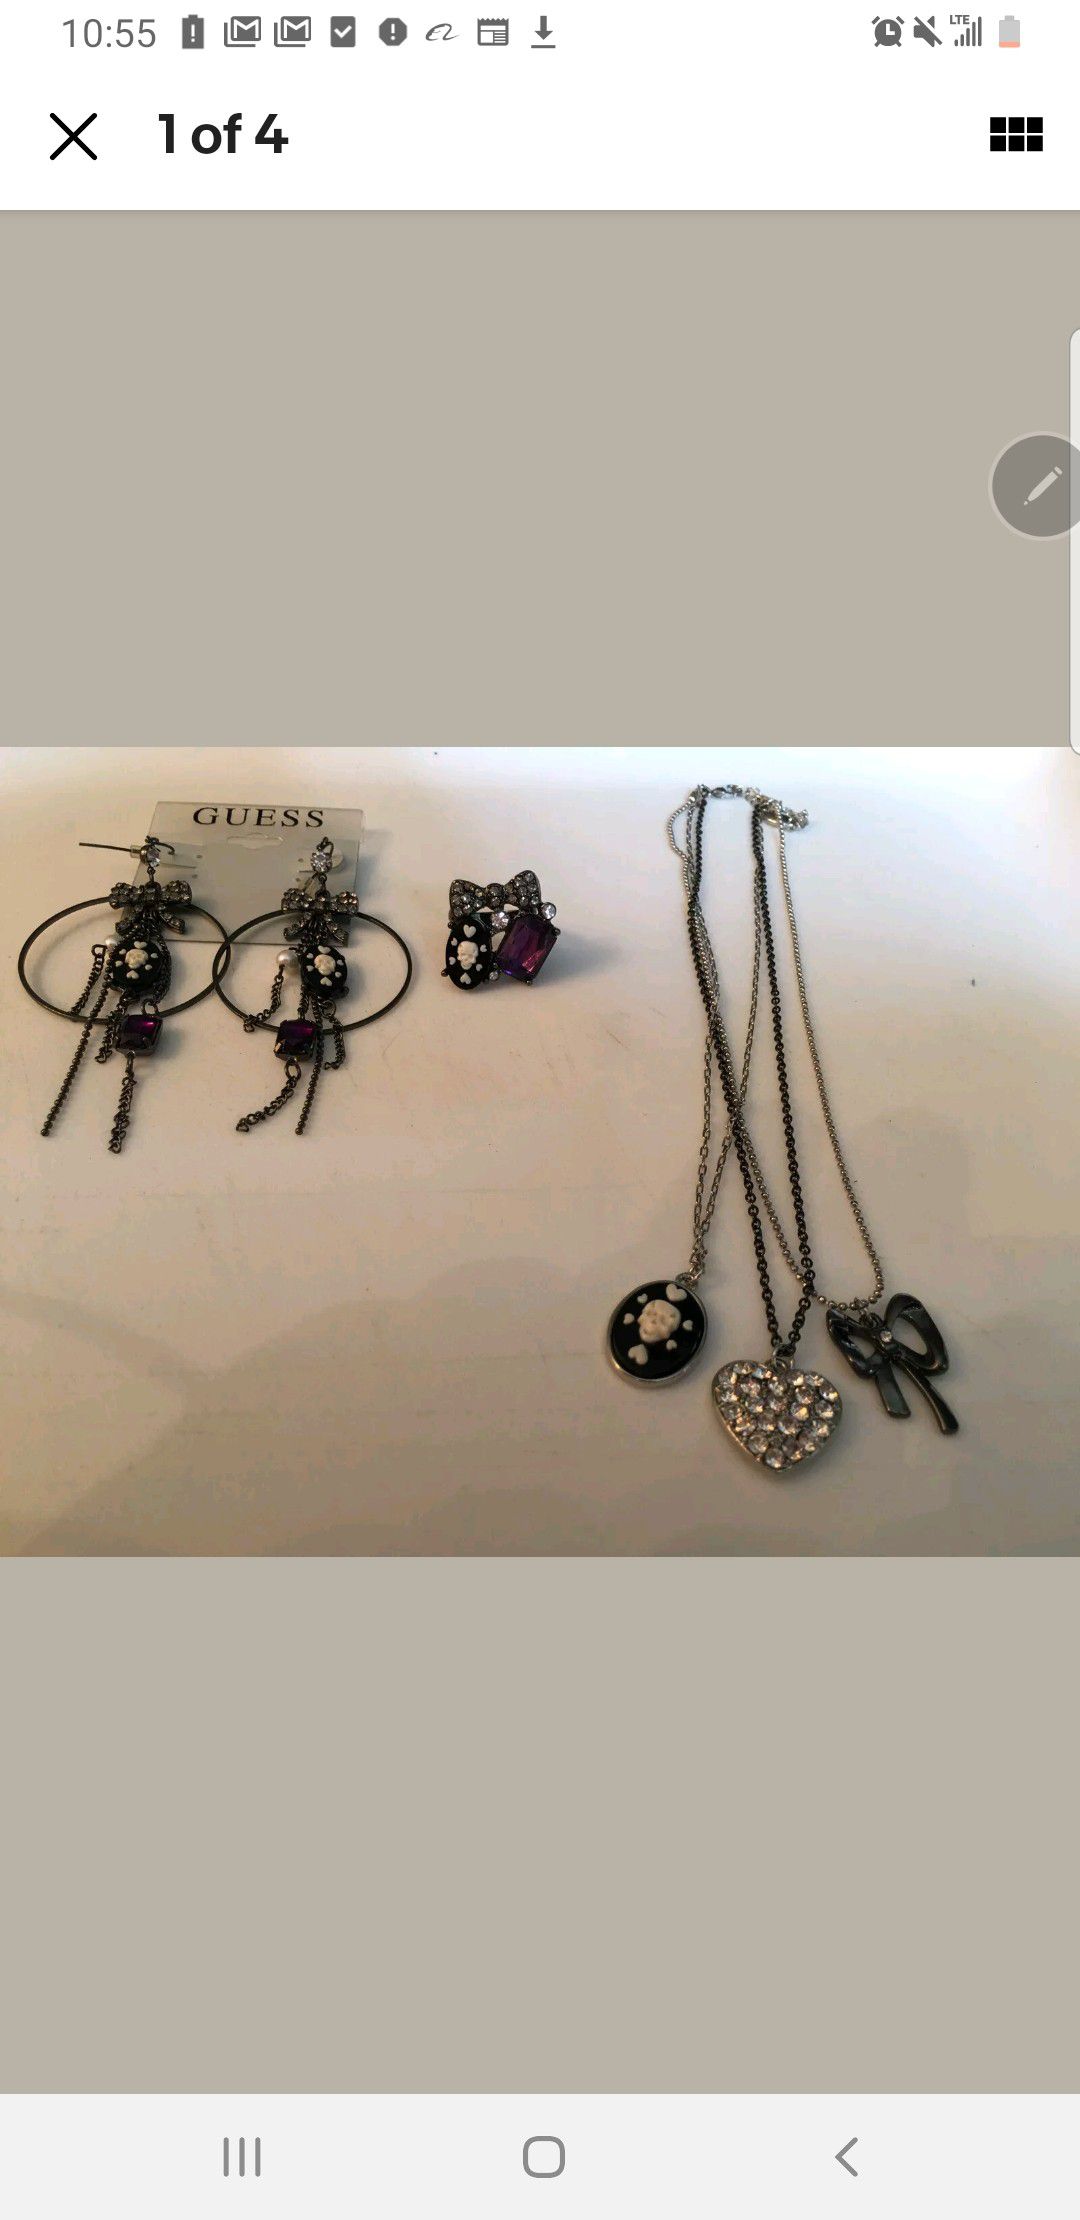 Guess Black/Gunmetal/Silver Charm Necklace, Hoop Earrings, Ring With Skull-Cameo